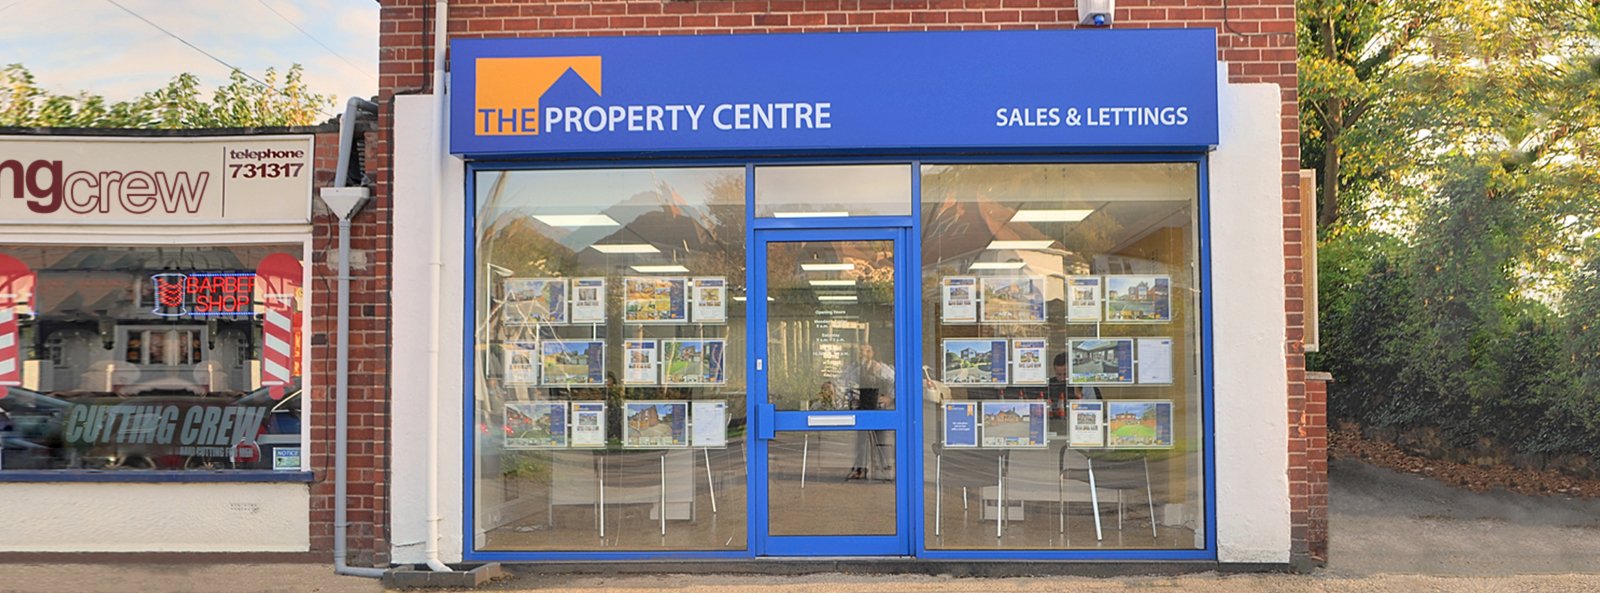 The Property Centre Worcester Estate Agents 